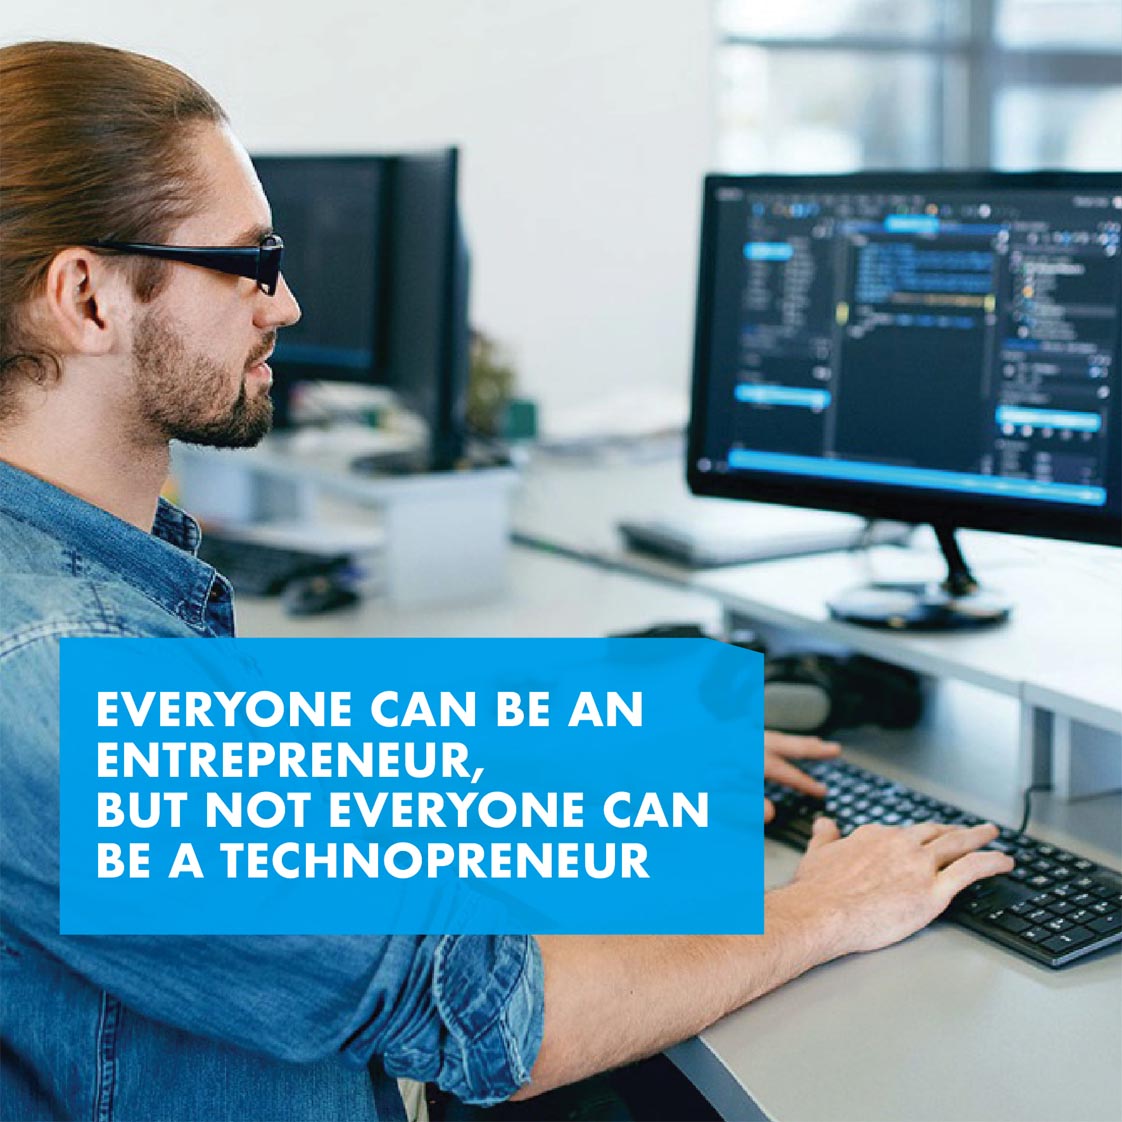 Everyone Can Be an Entrepreneur,  But Not Everyone Can Be a Technopreneur, Here is the reason!